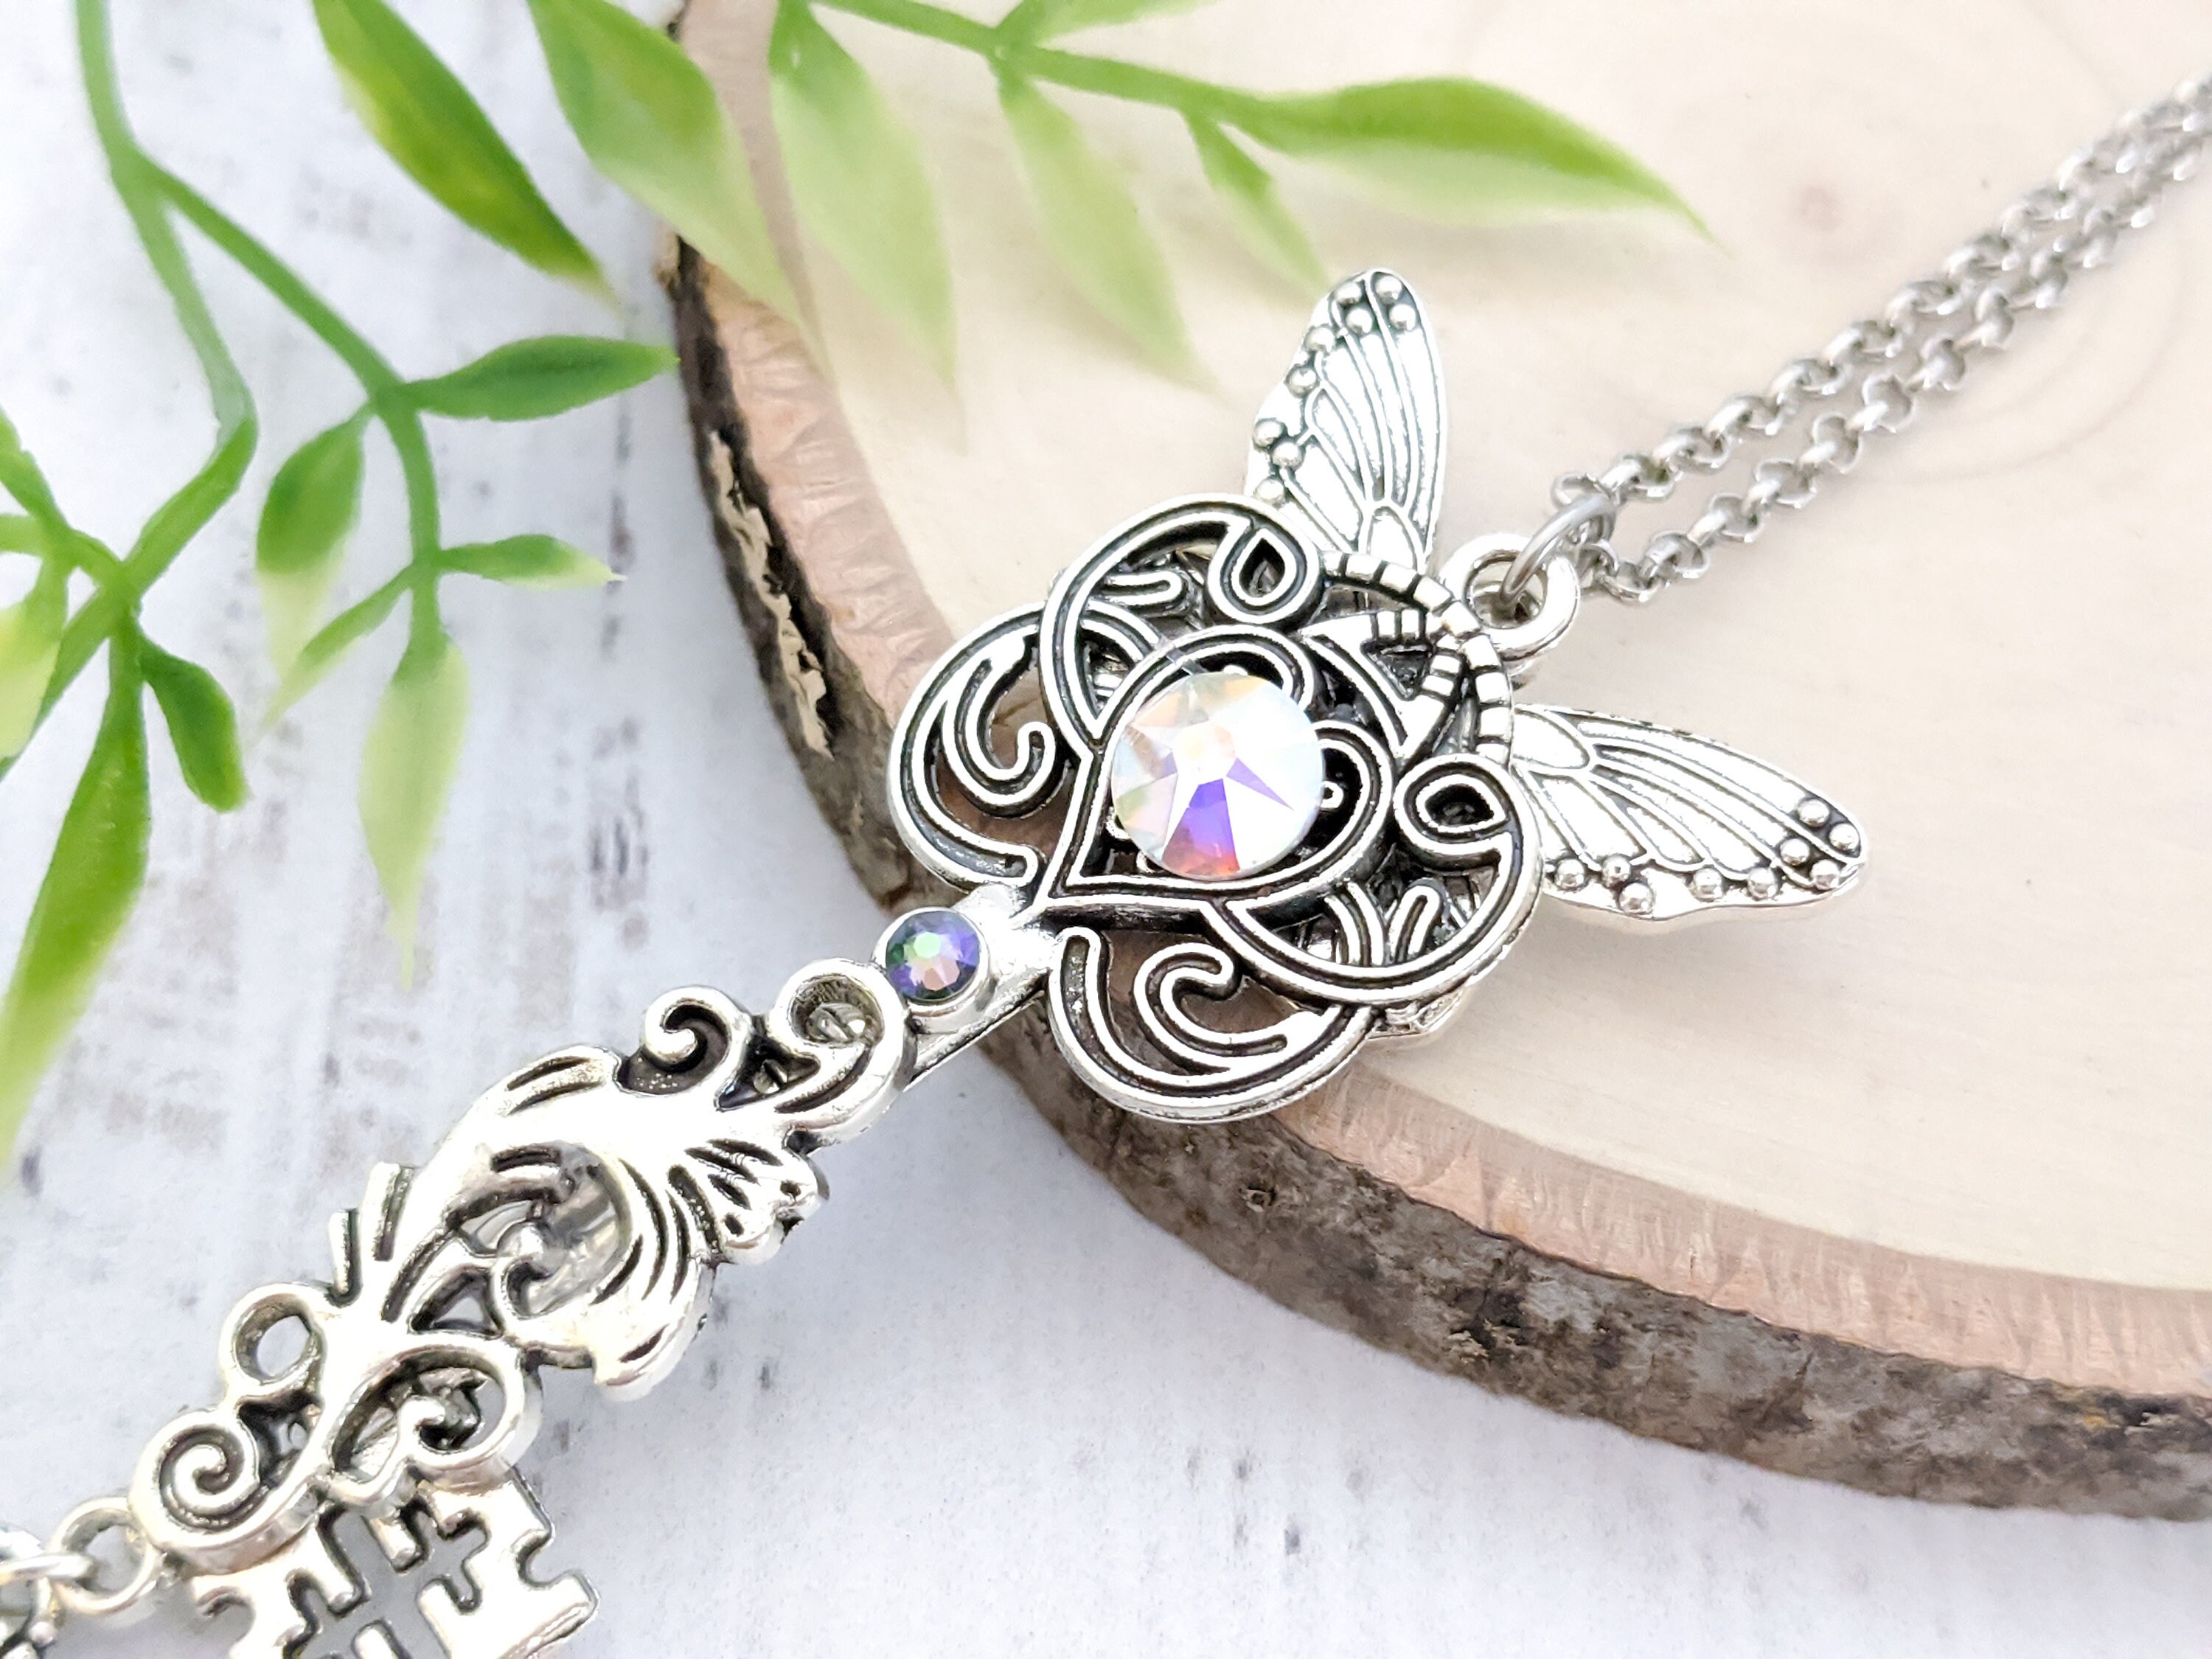 Skeleton Key Necklace Fluttering Oasis - Butterfly Key to My Heart Crystal Pendant, Statement Fairy Jewelry Fairycore Fantasy Witchy Gift